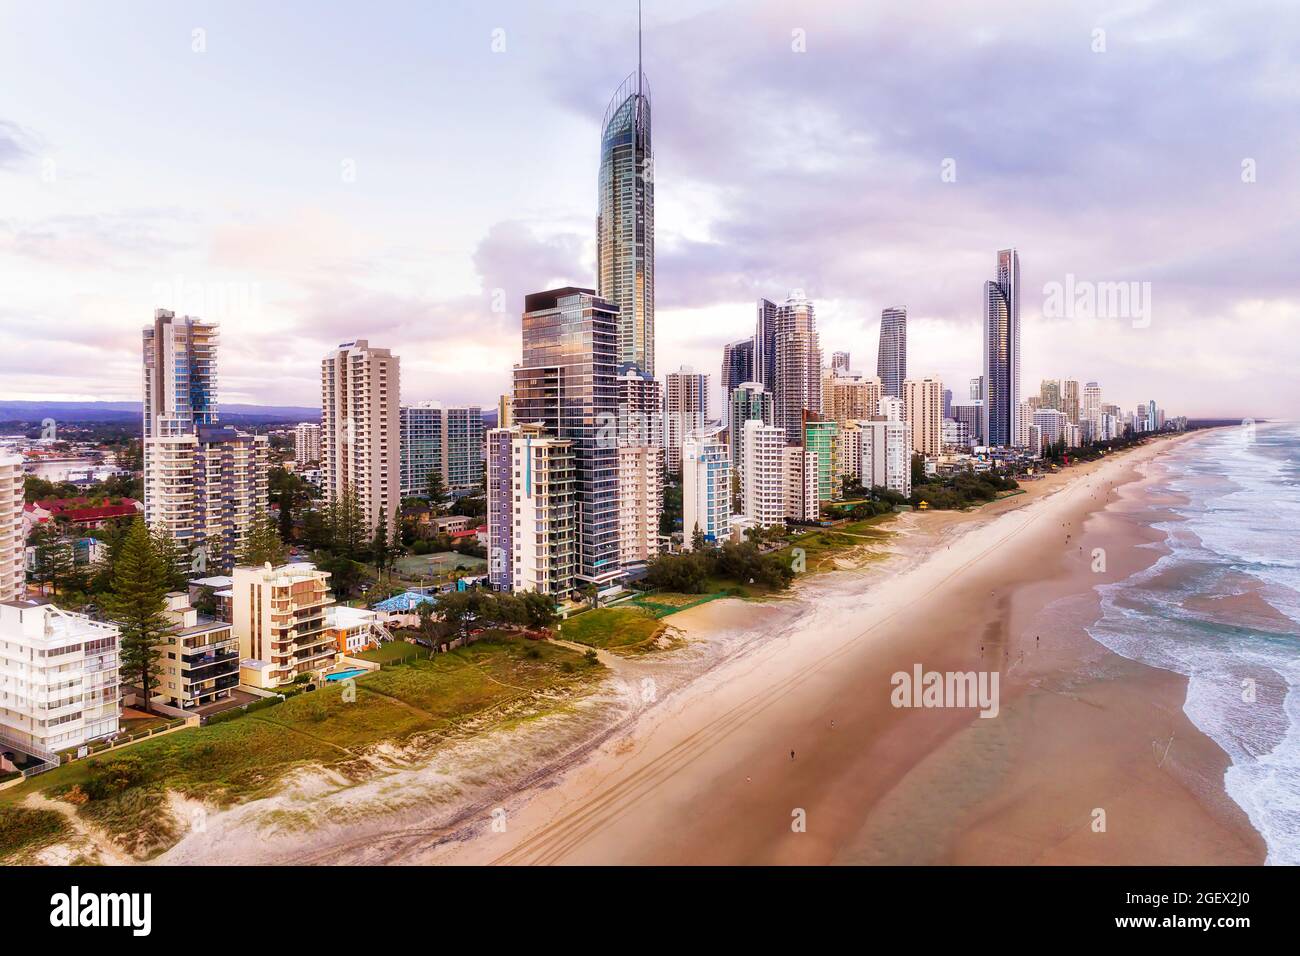 High-rise modern urban towers on waterfront of Surfers Paradise Pacific coast - Australian Gold Coast. Stock Photo